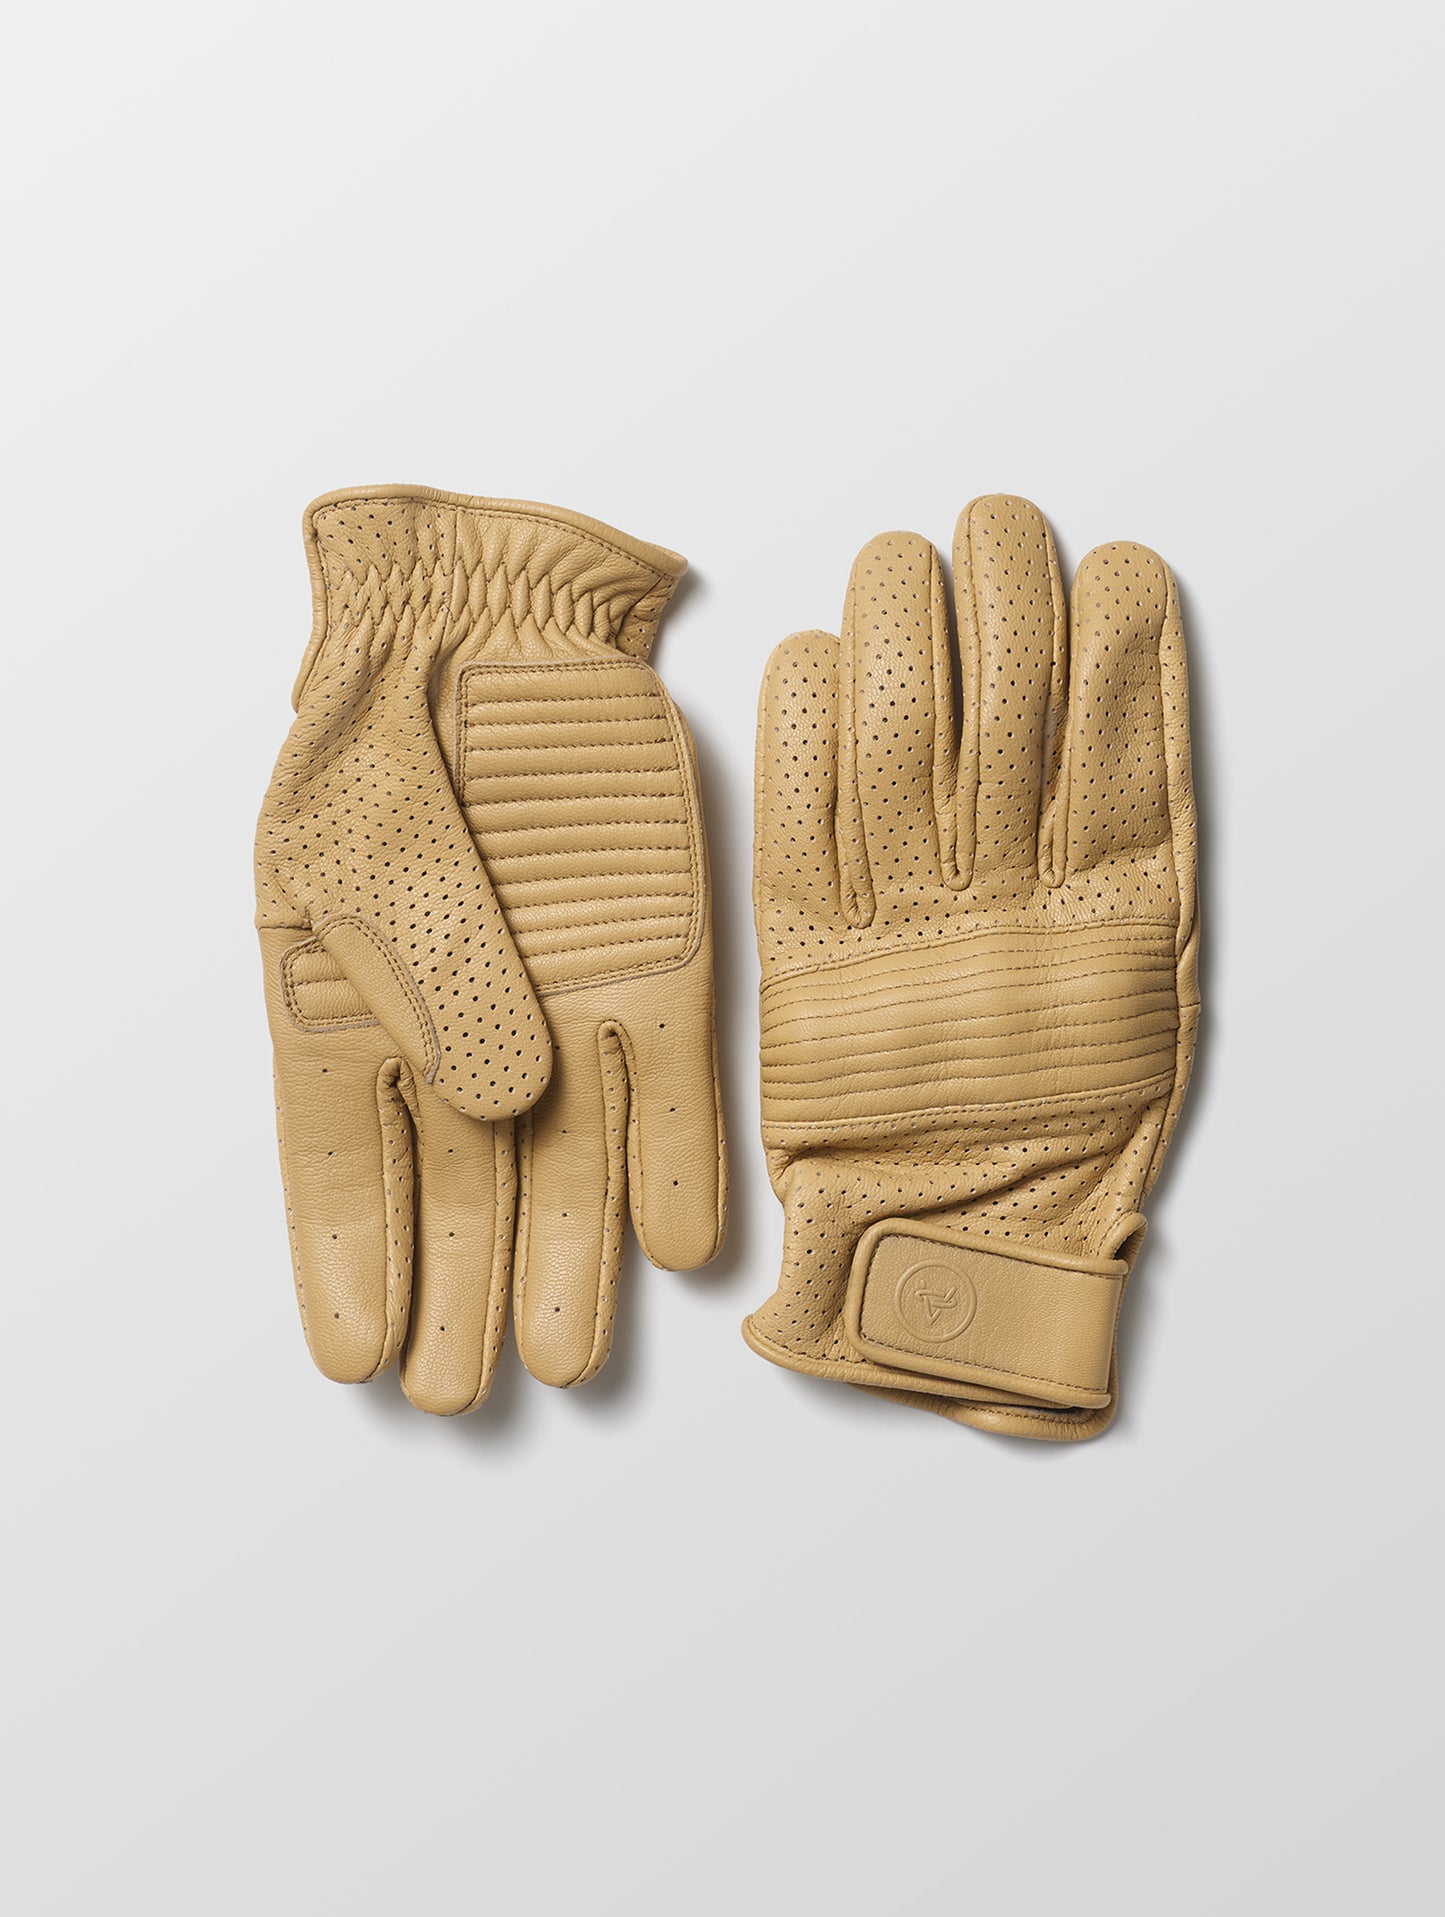 Pair of tan motorcycle gloves from AETHER Apparel